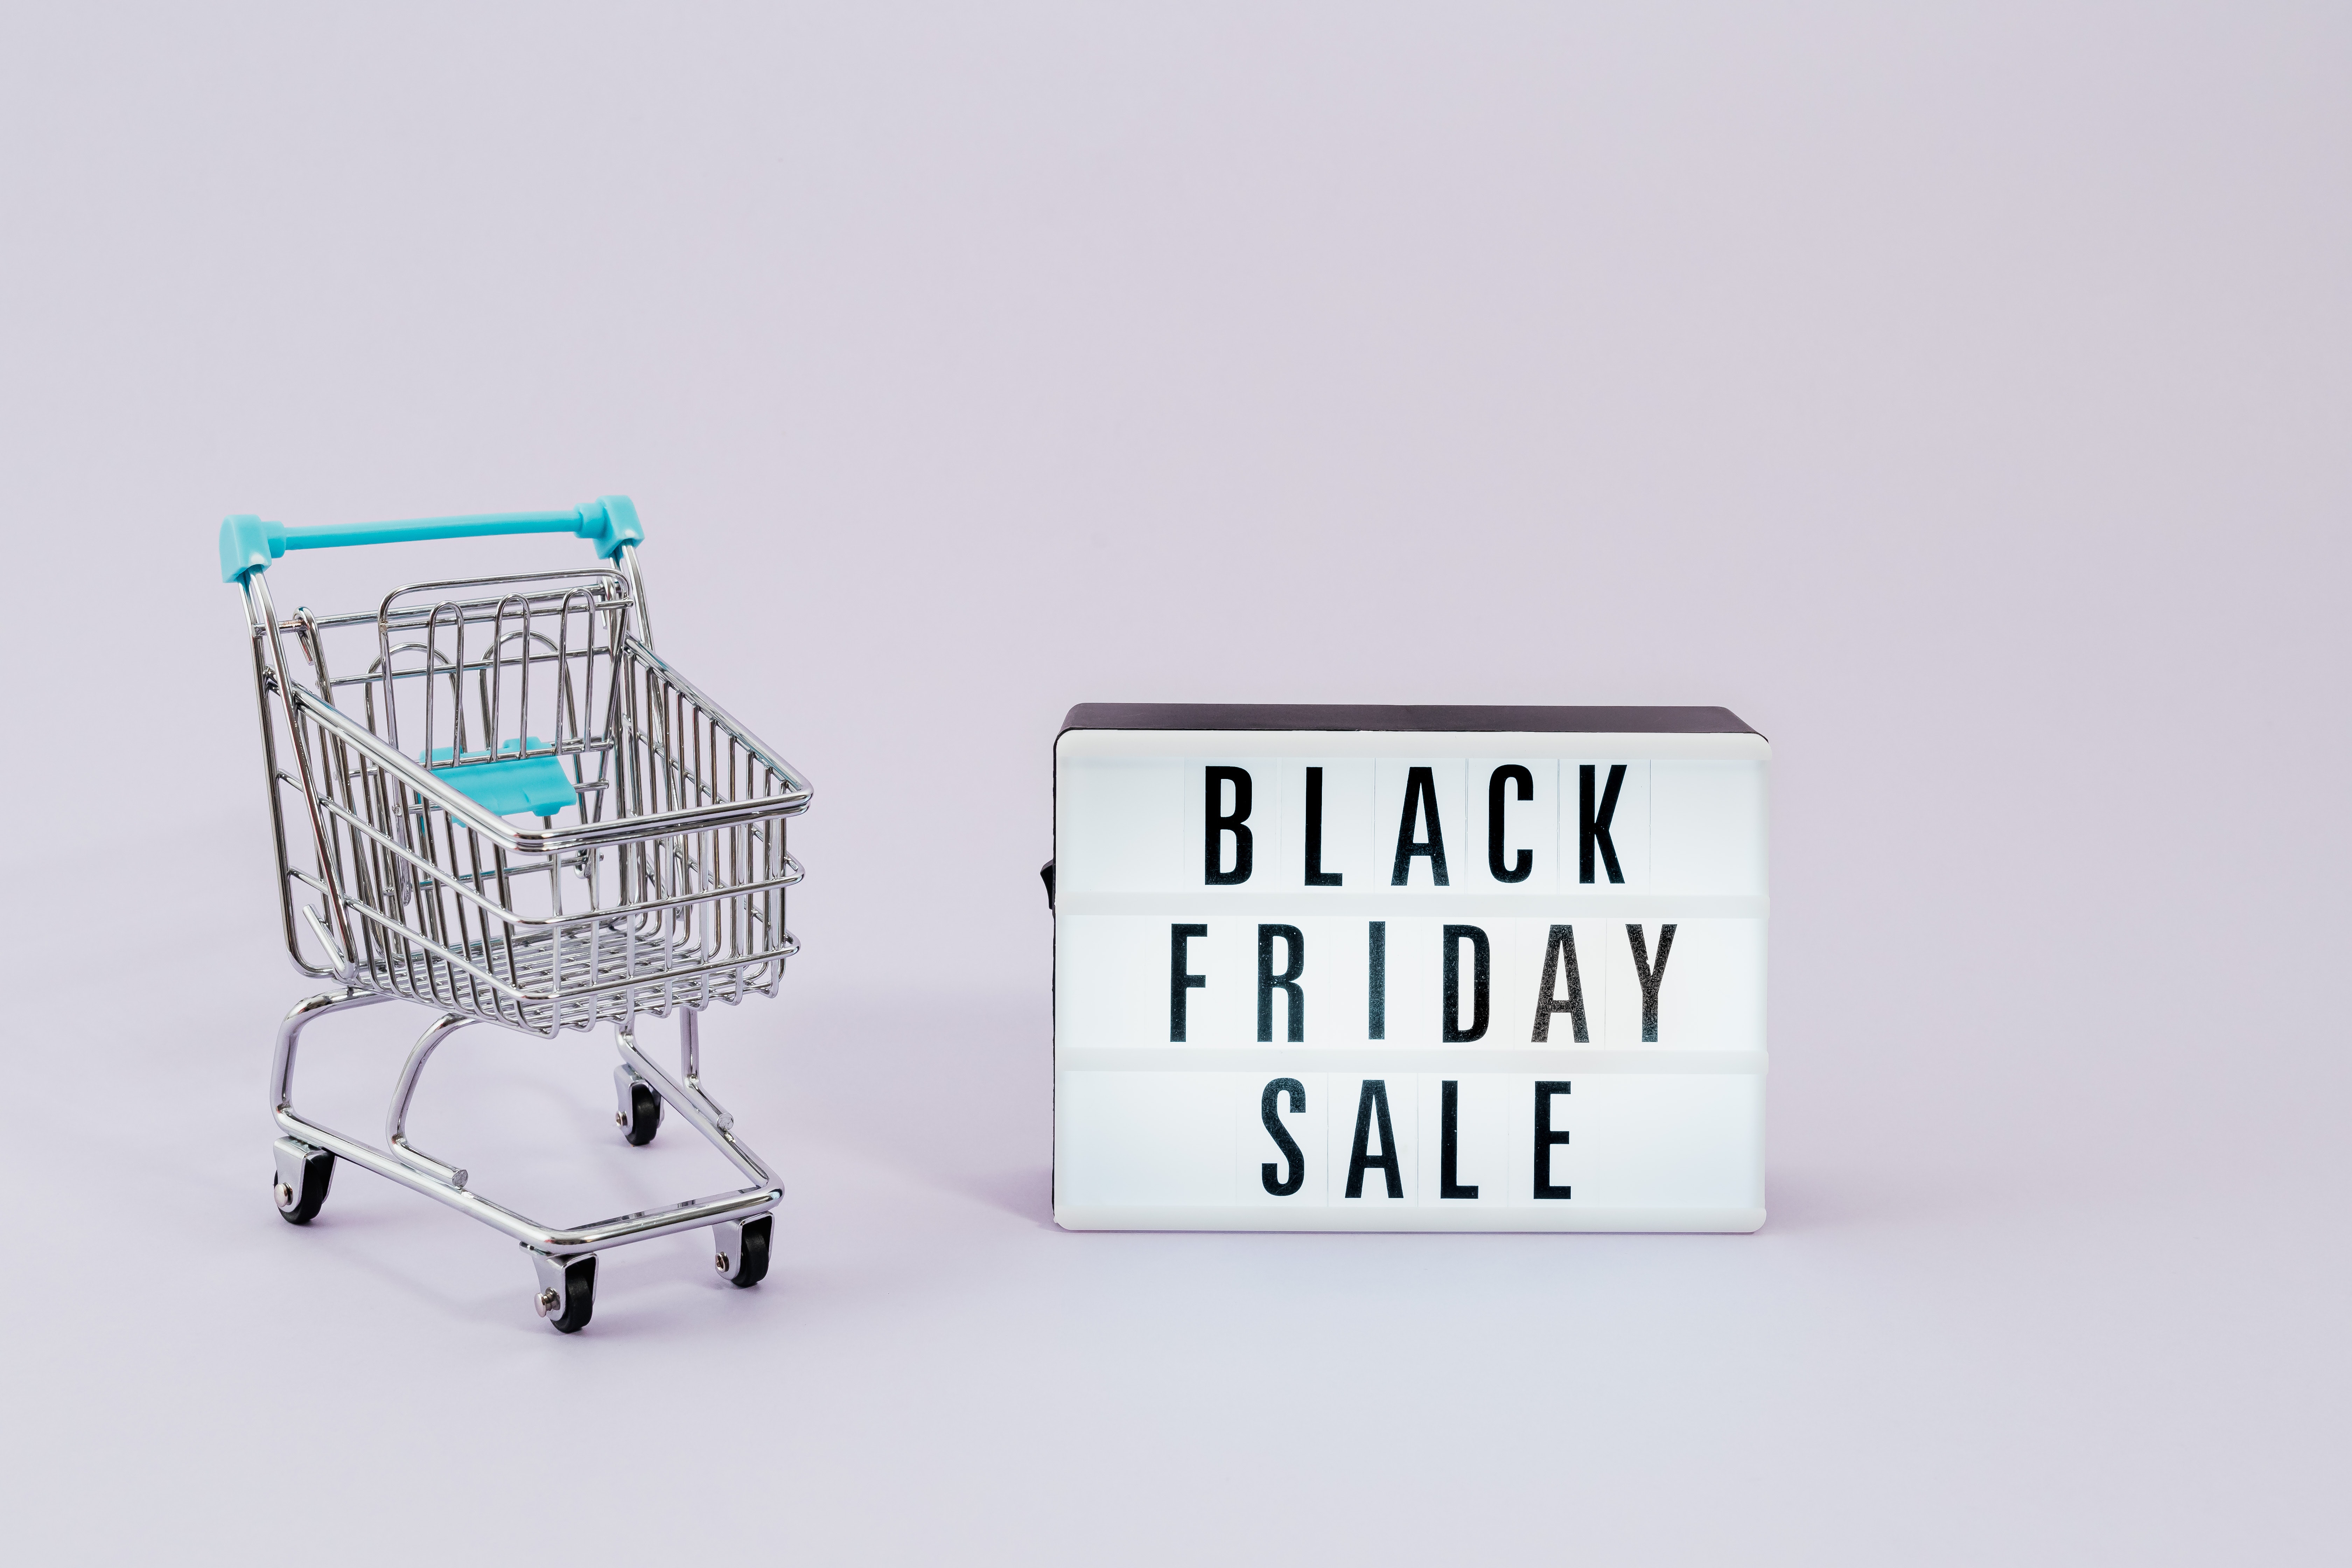  Diamond Trust Bank Partners with Jumia for Black Friday Campaign